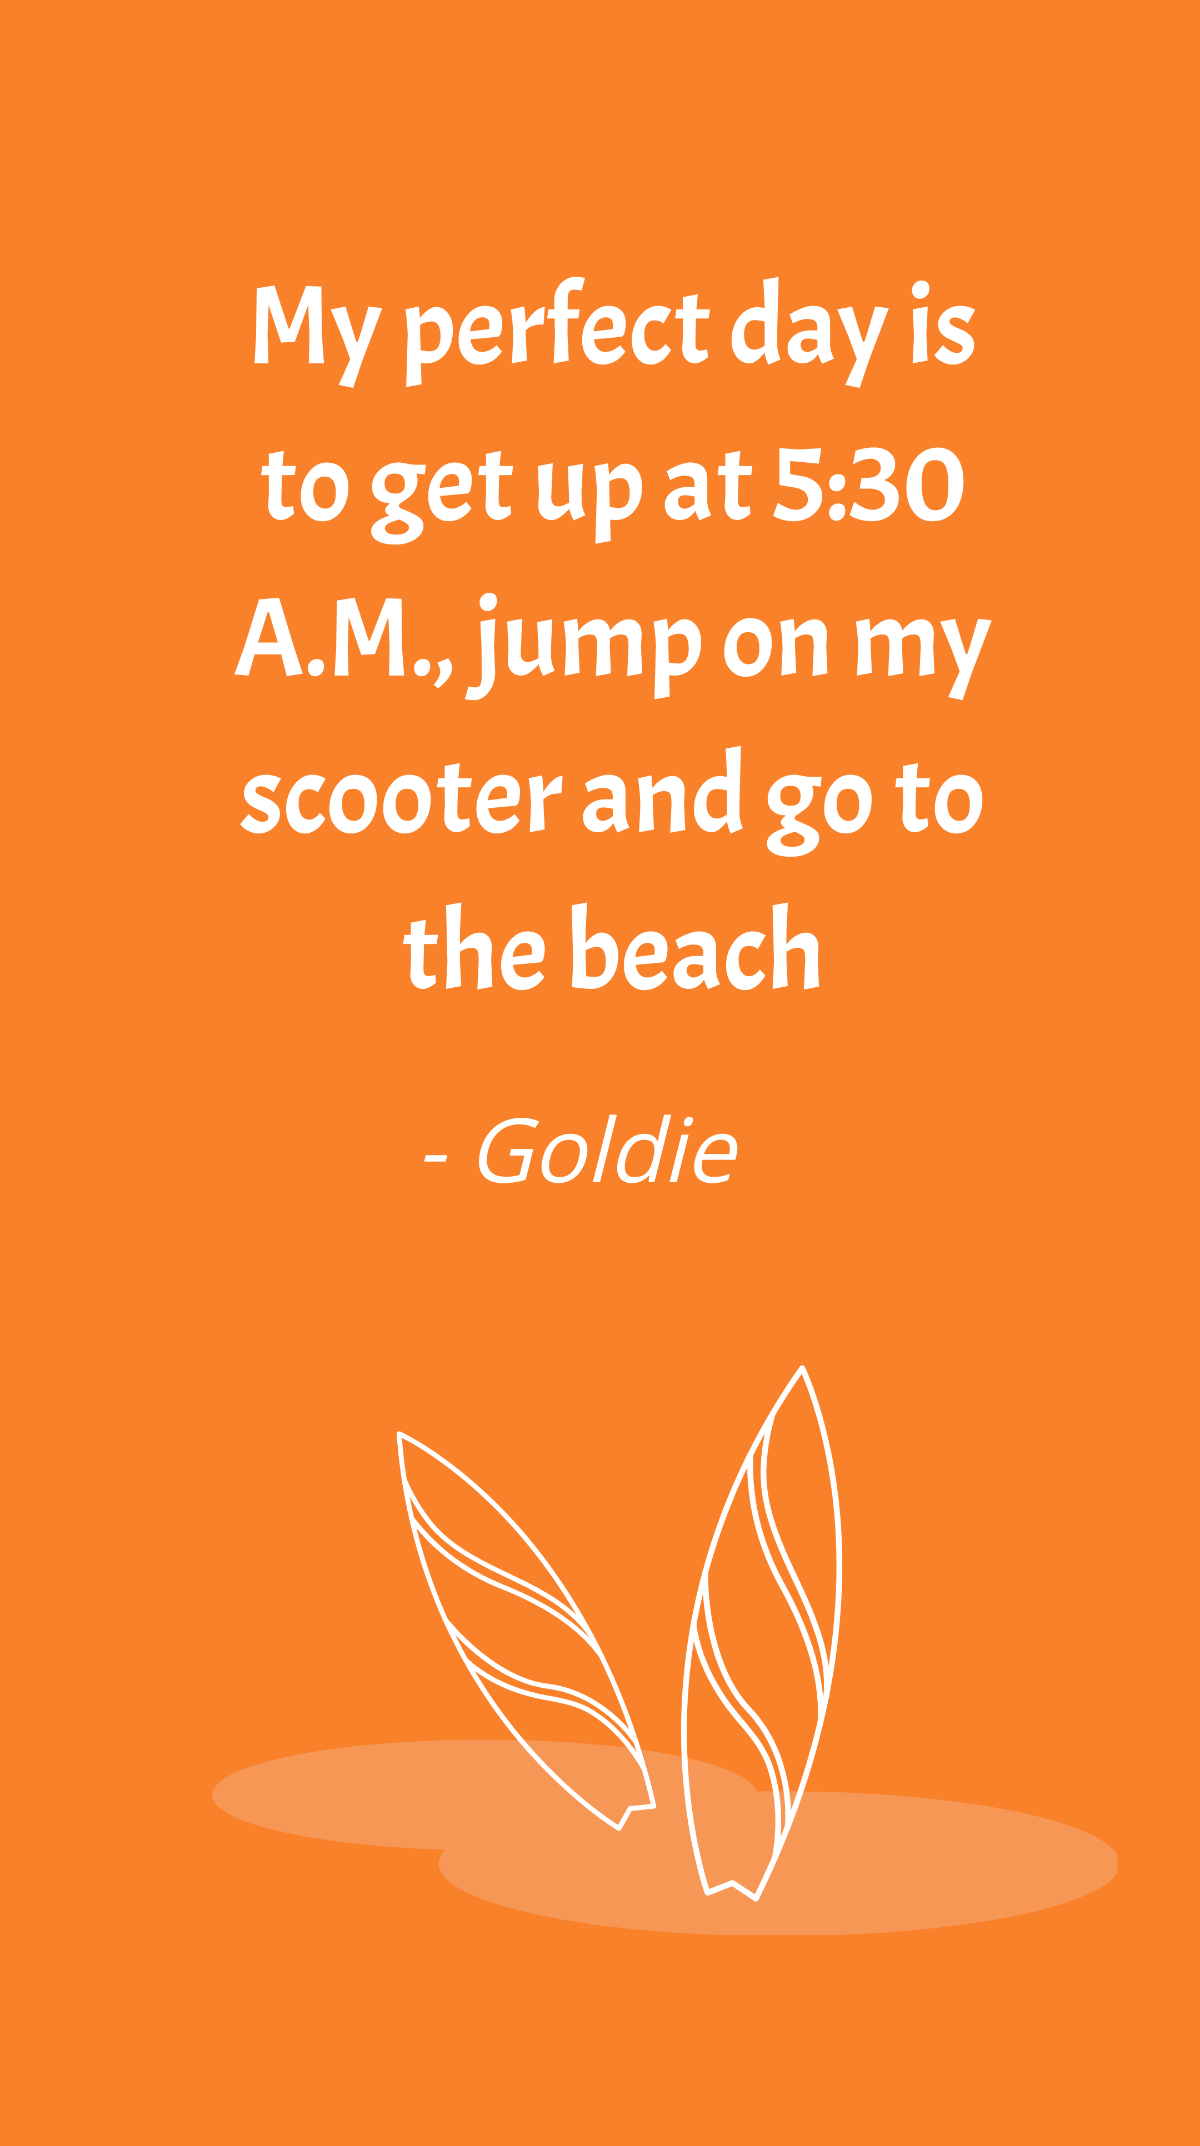 Goldie - My perfect day is to get up at 5:30 A.M., jump on my scooter and go to the beach Template